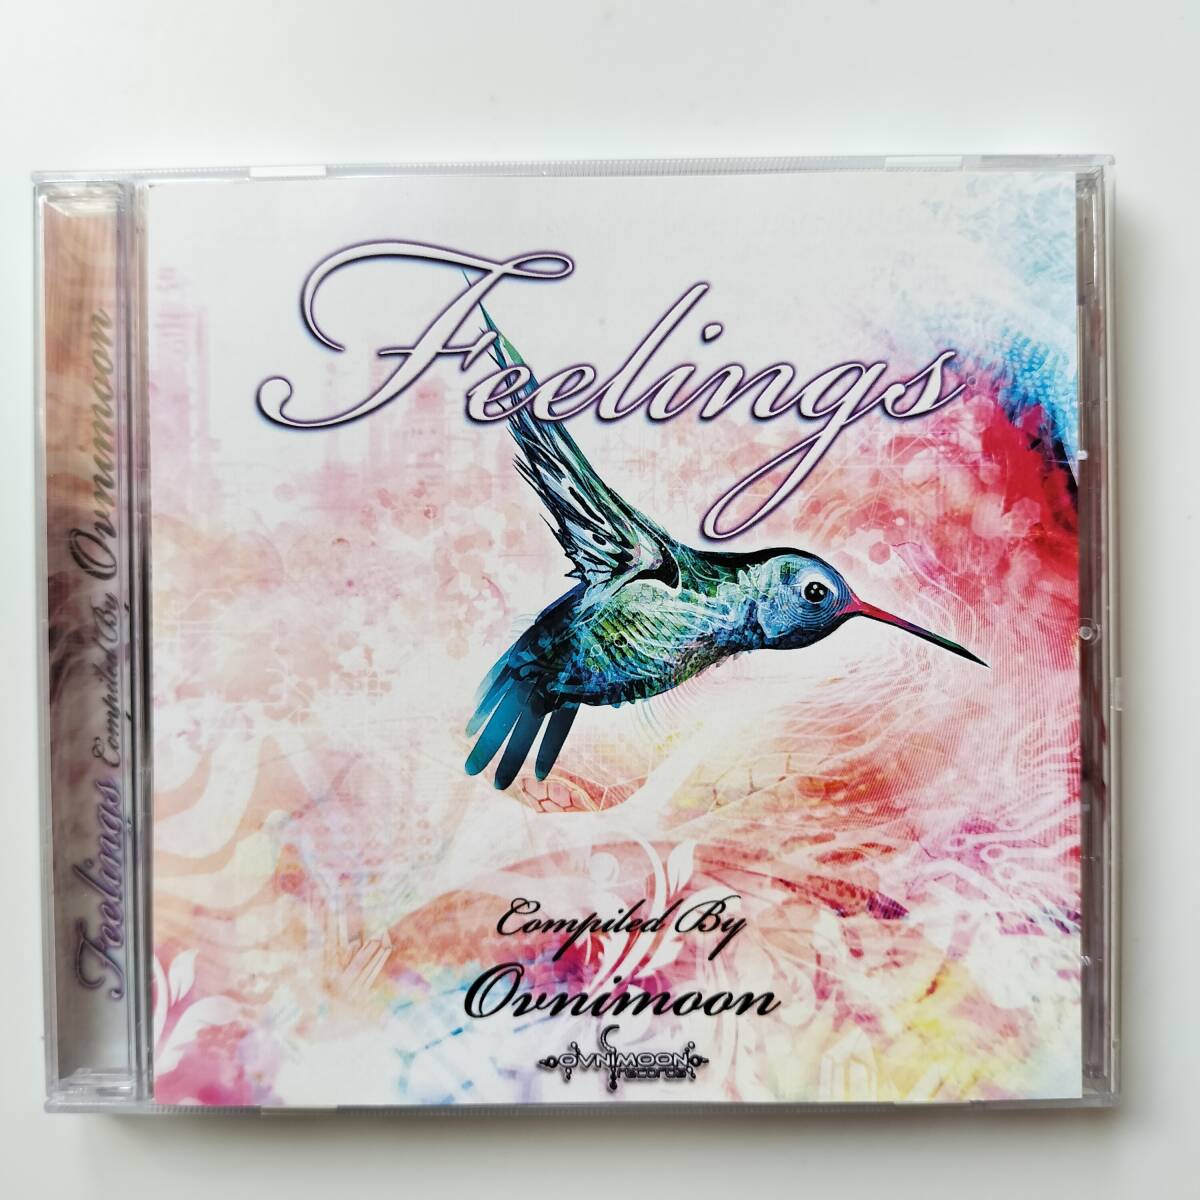 Feelings - Compiled By Ovnimoon /2012 Ovnimoon Records Goa Records OVNICD021 psychedelic trance_画像1